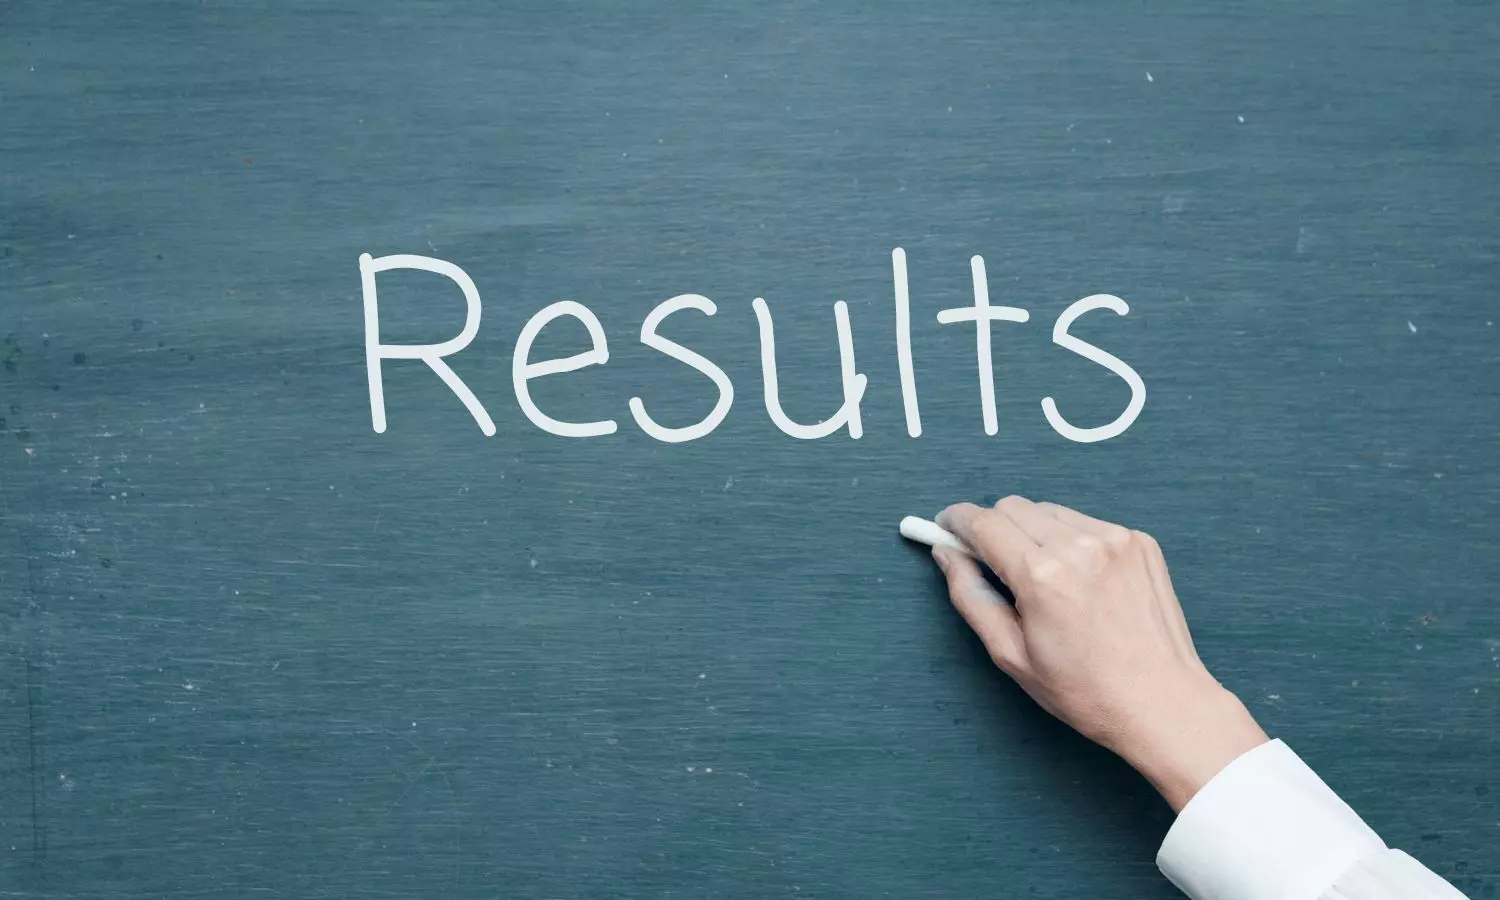 UPSC Declares Final Results Of Combined Medical Service Examination 2021, details